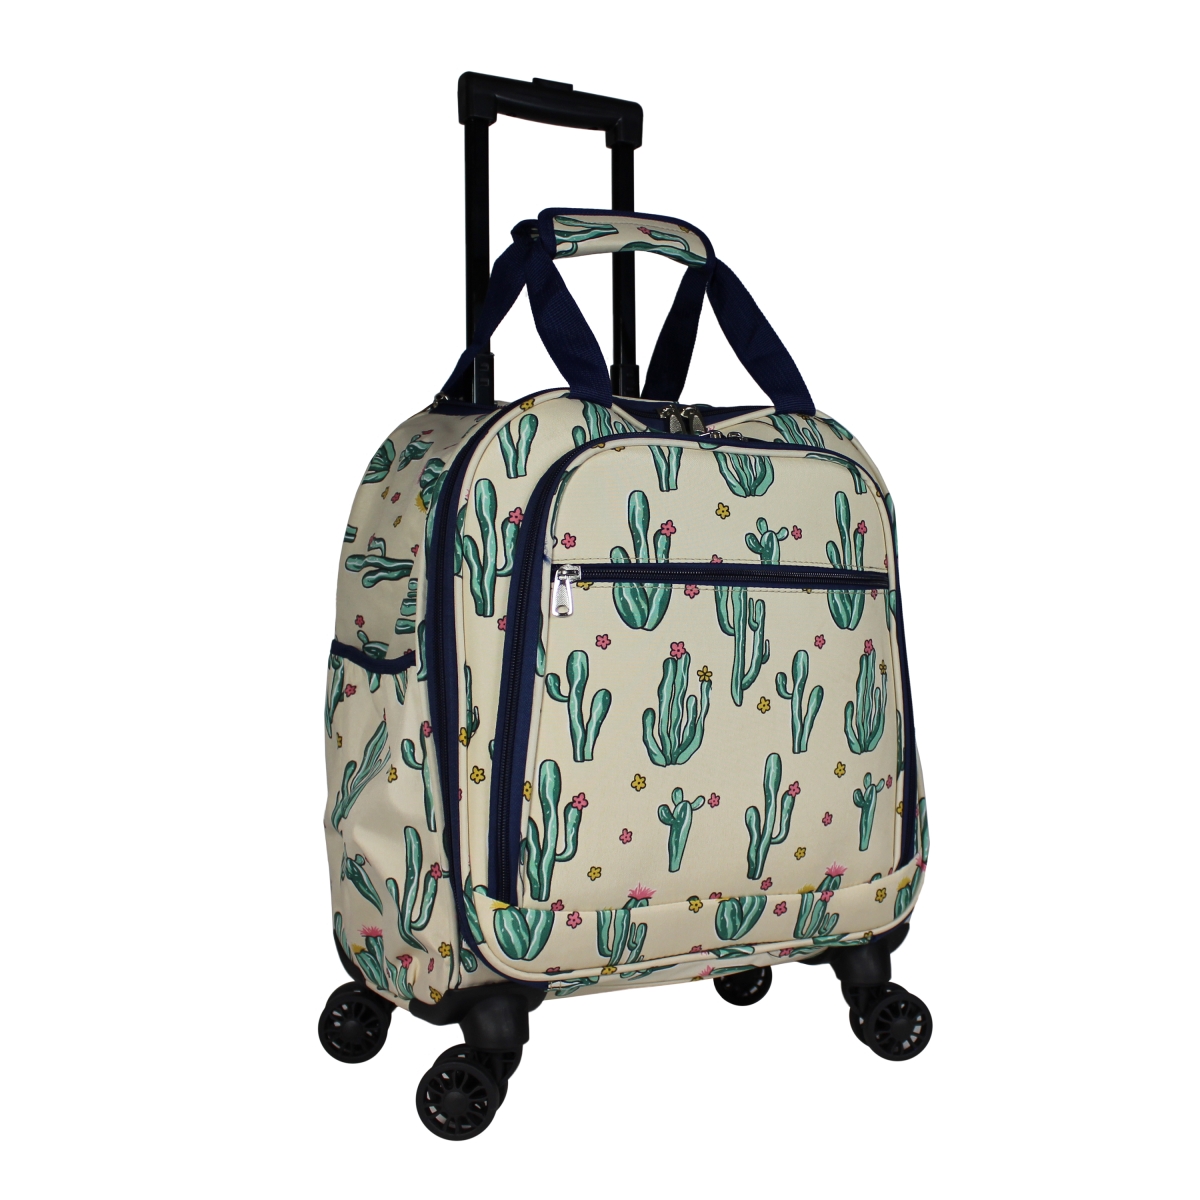 815501-241 18 In. Prints Spinner Carry-on Luggage, Cactus Beige